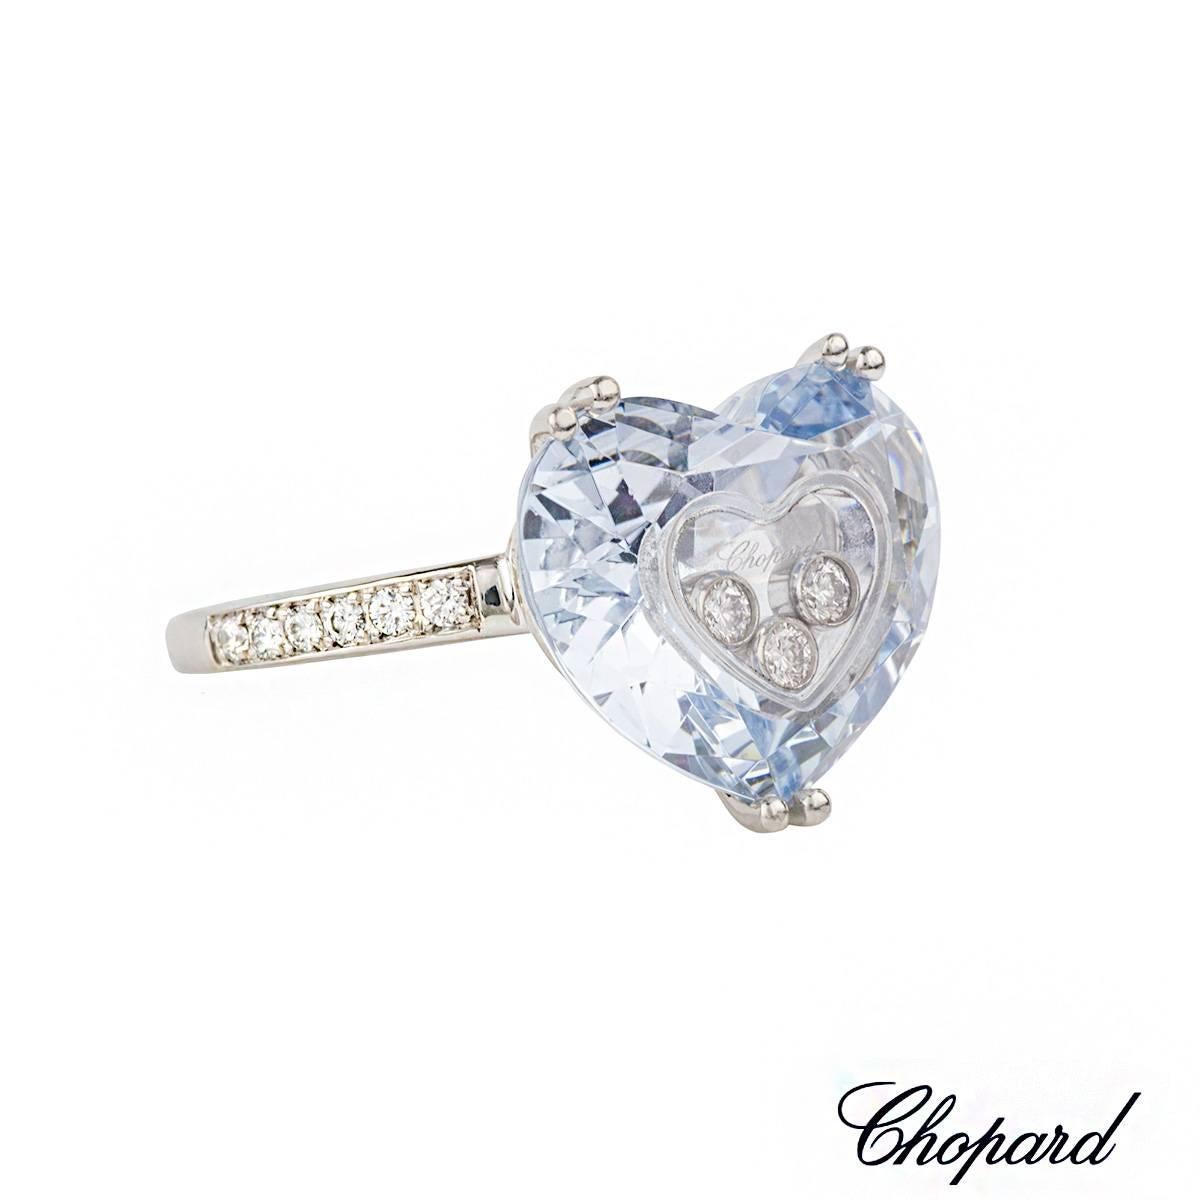 An 18k white gold ring from the Chopard happy Diamonds collection. The ring is composed of a blue glass heart motif encasing three round brilliant cut diamonds in the centre. The heart is complemented by pave set round brilliant cut diamond